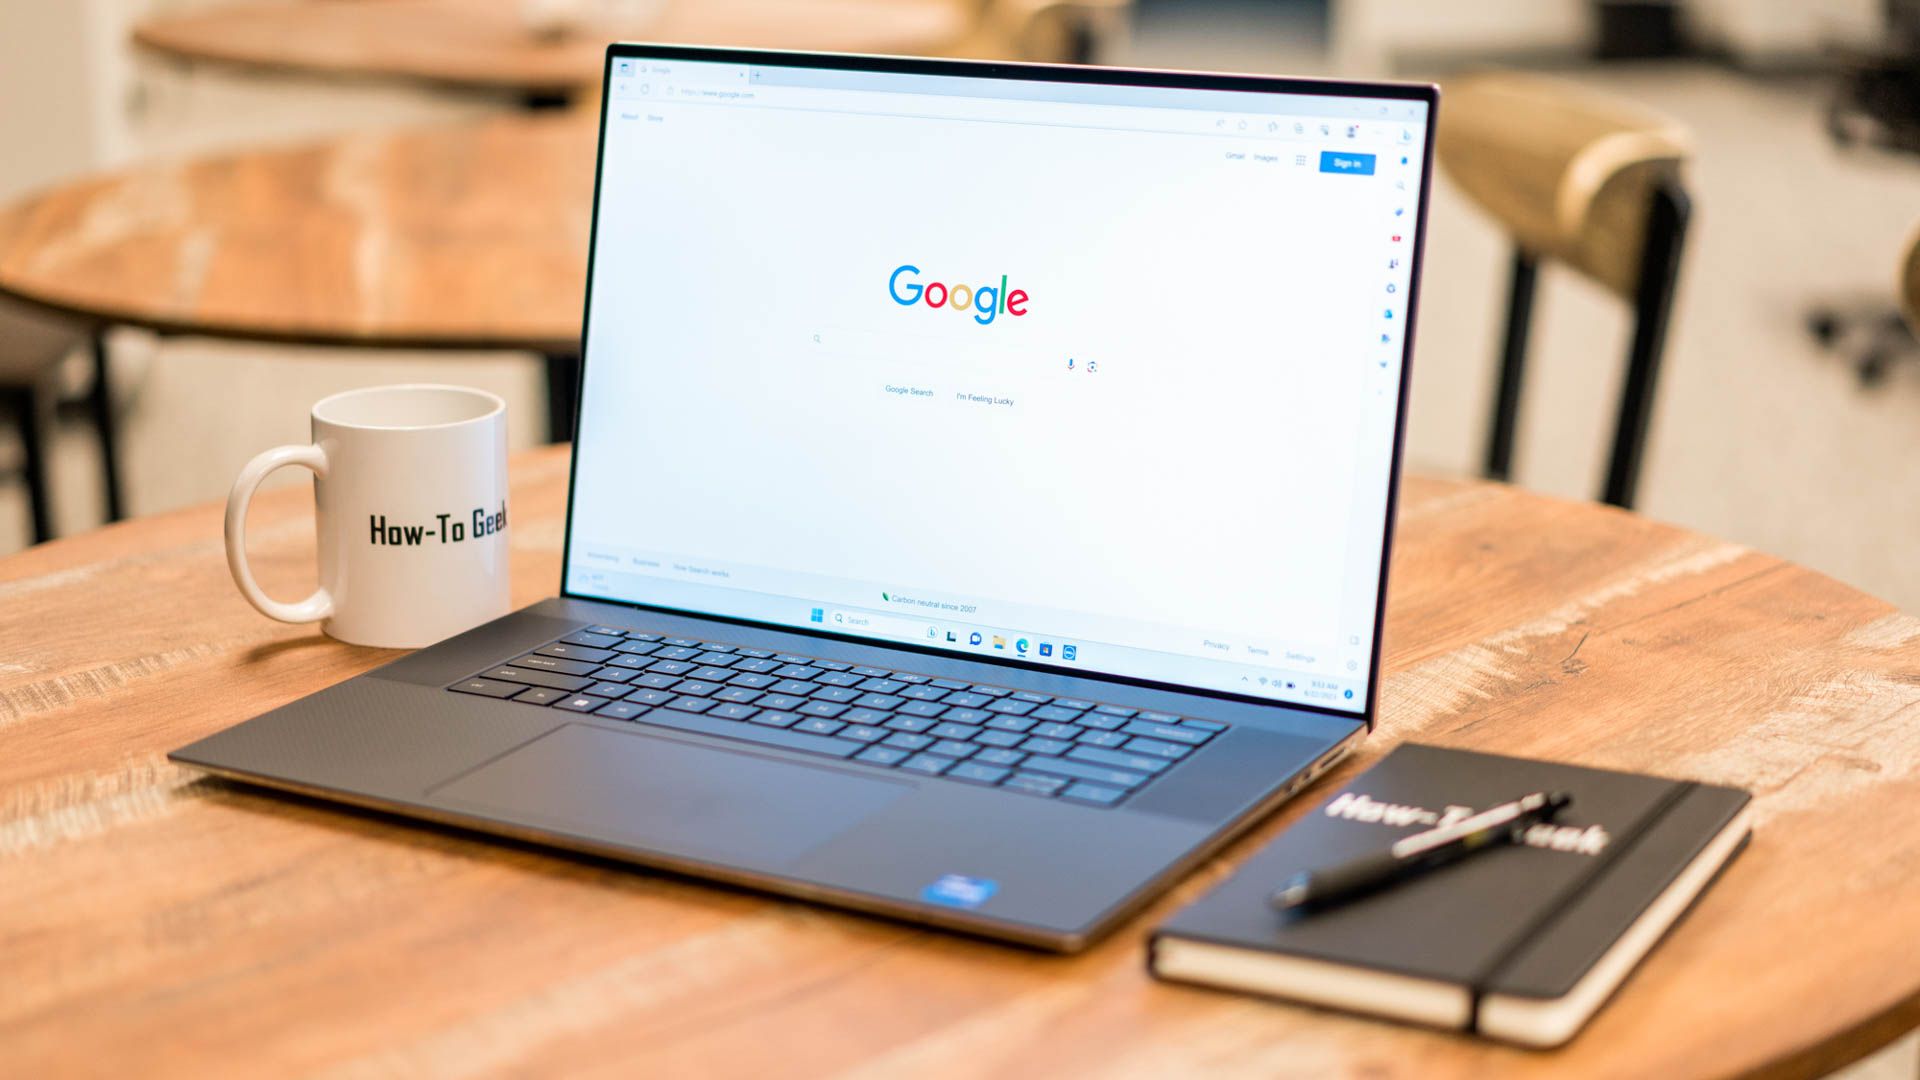 Using Google Search on a Dell XPS laptop.